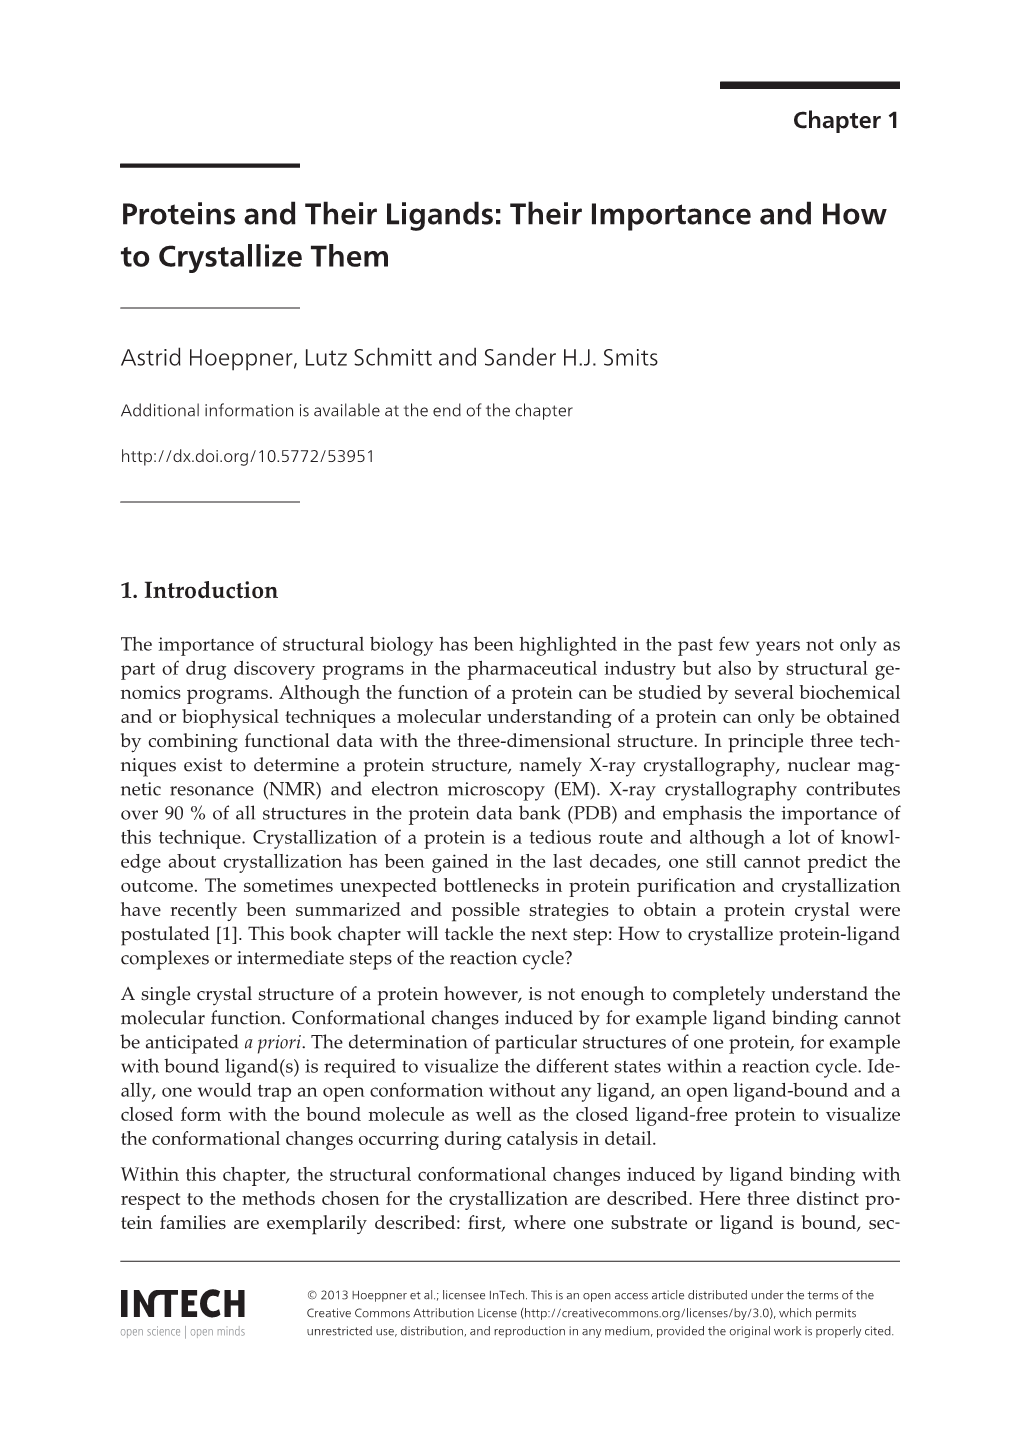 Proteins and Their Ligands: Their Importance and How to Crystallize Them